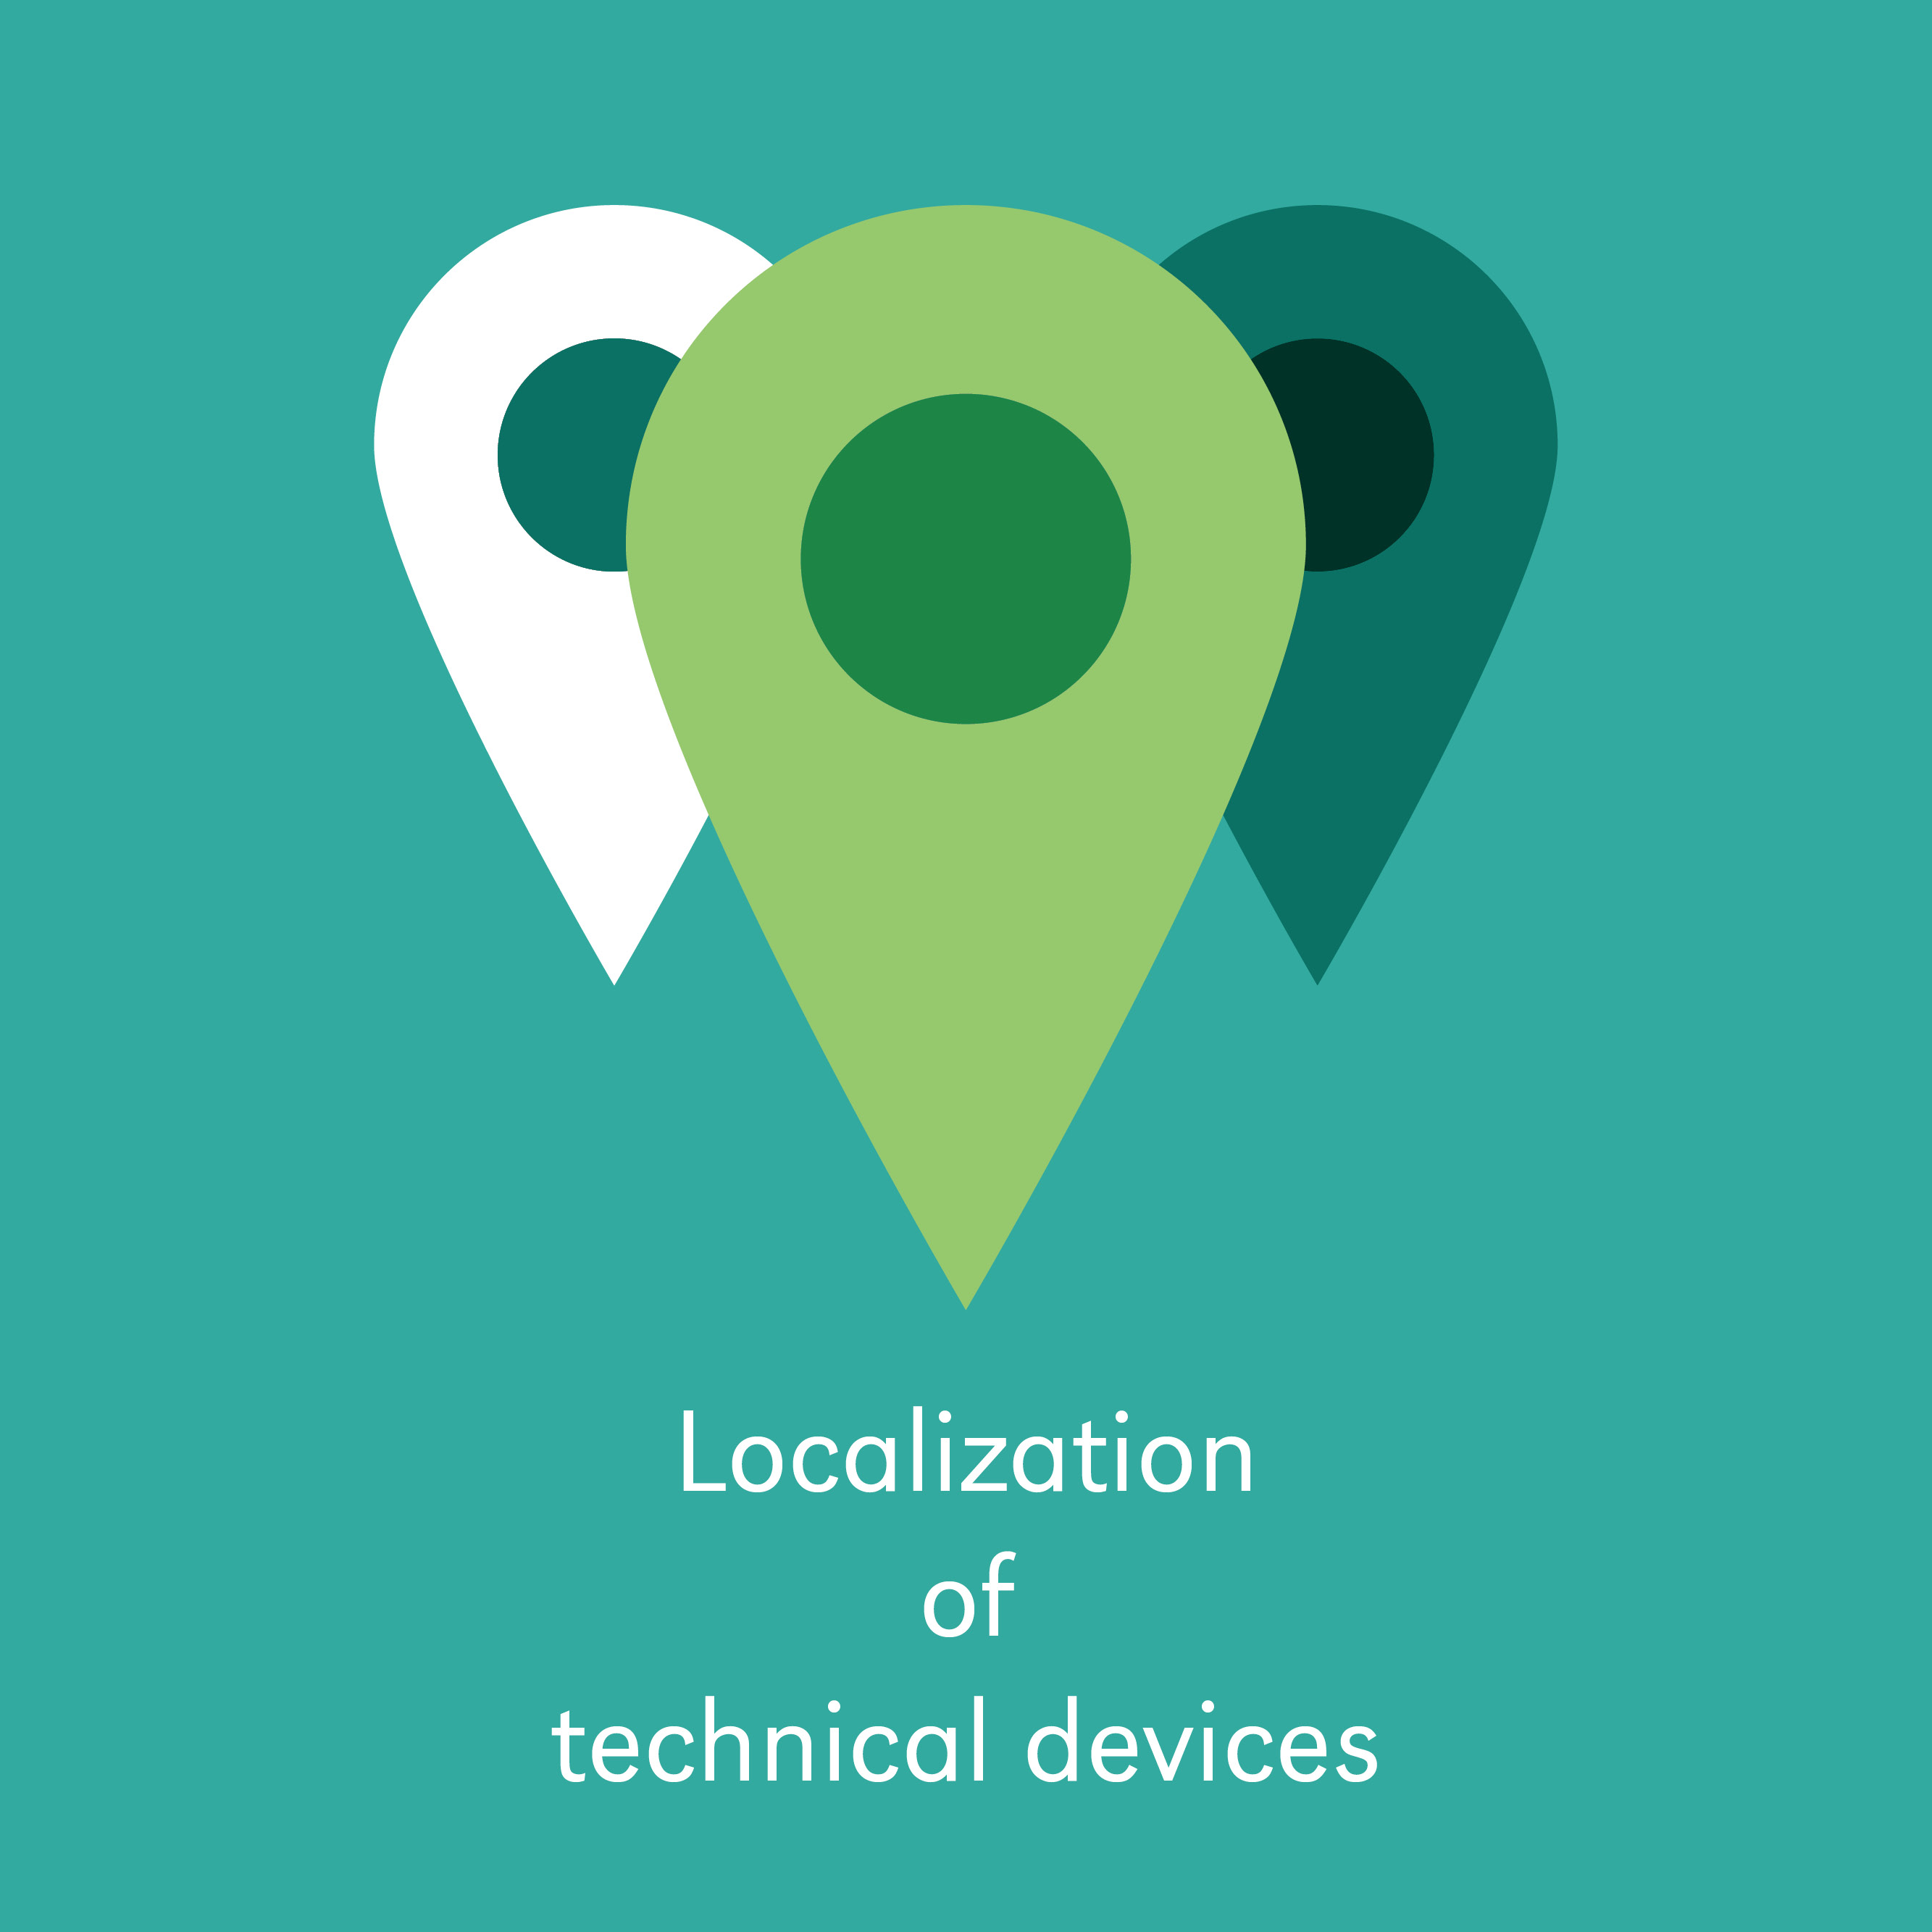 Localization of technical devices / machines